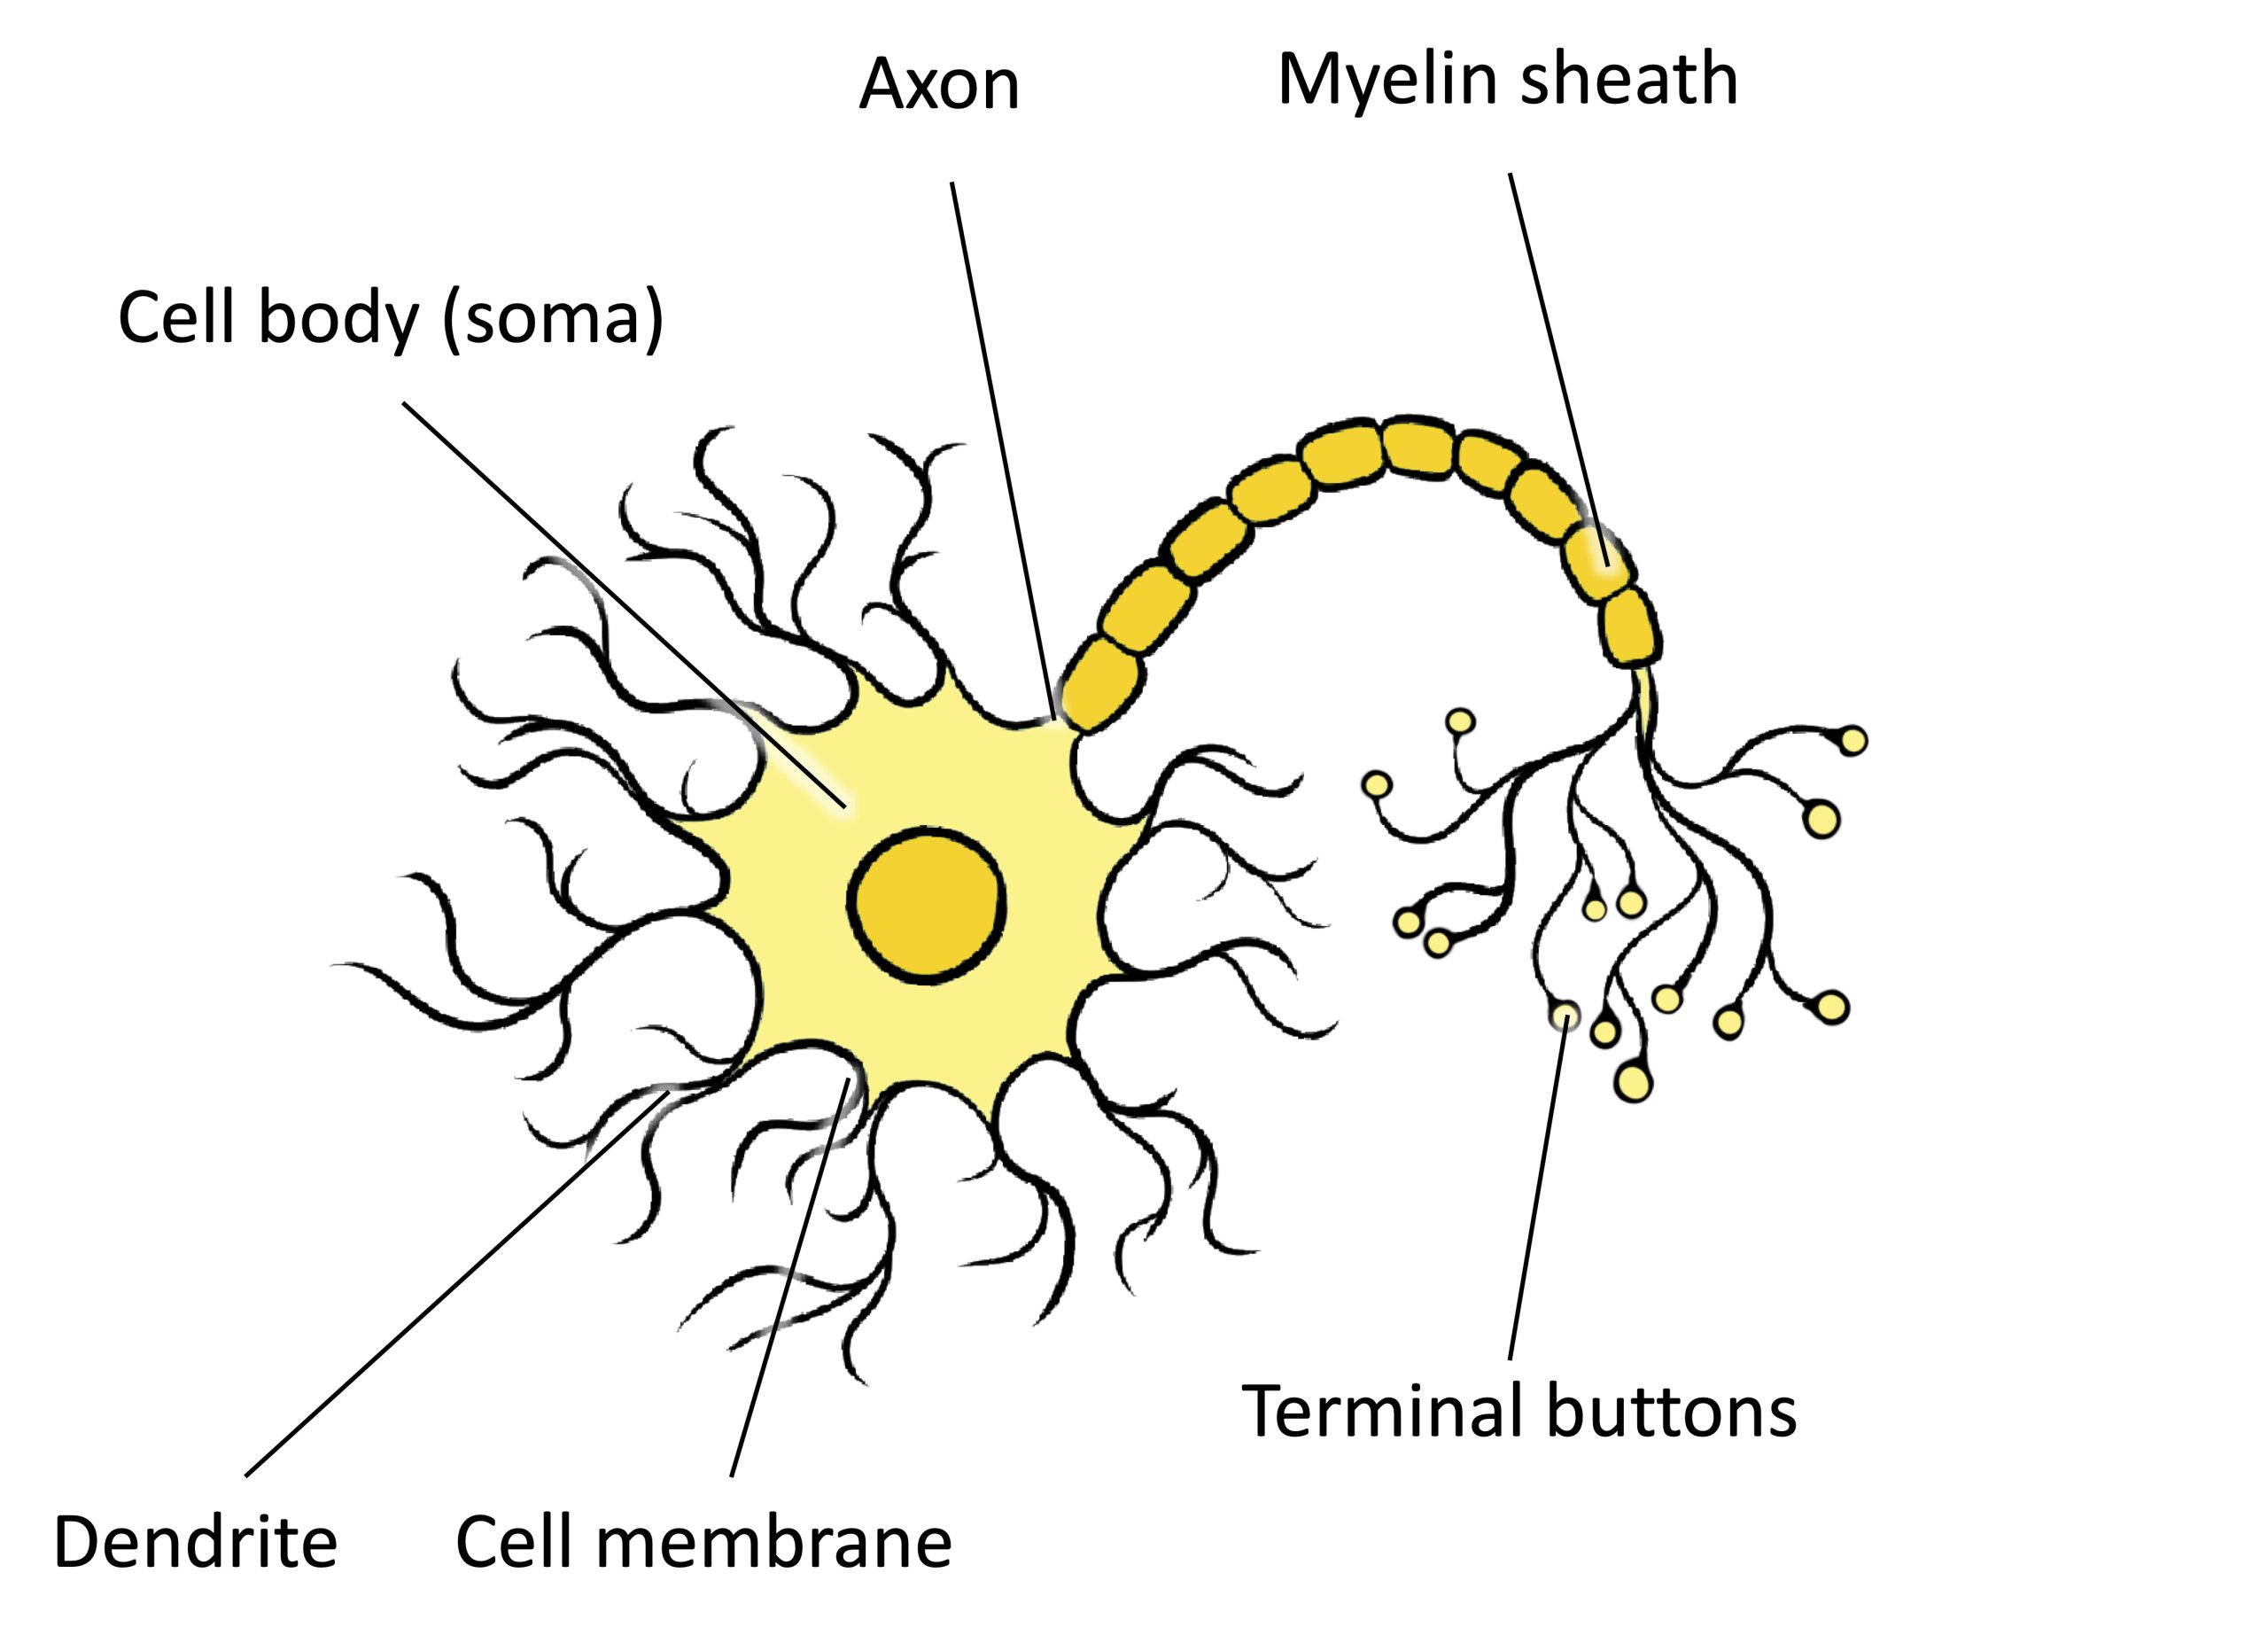 An illustration shows a neuron with labeled parts for the cell membrane, dendrite, cell body, axon, and terminal buttons. A myelin sheath covers part of the neuron.